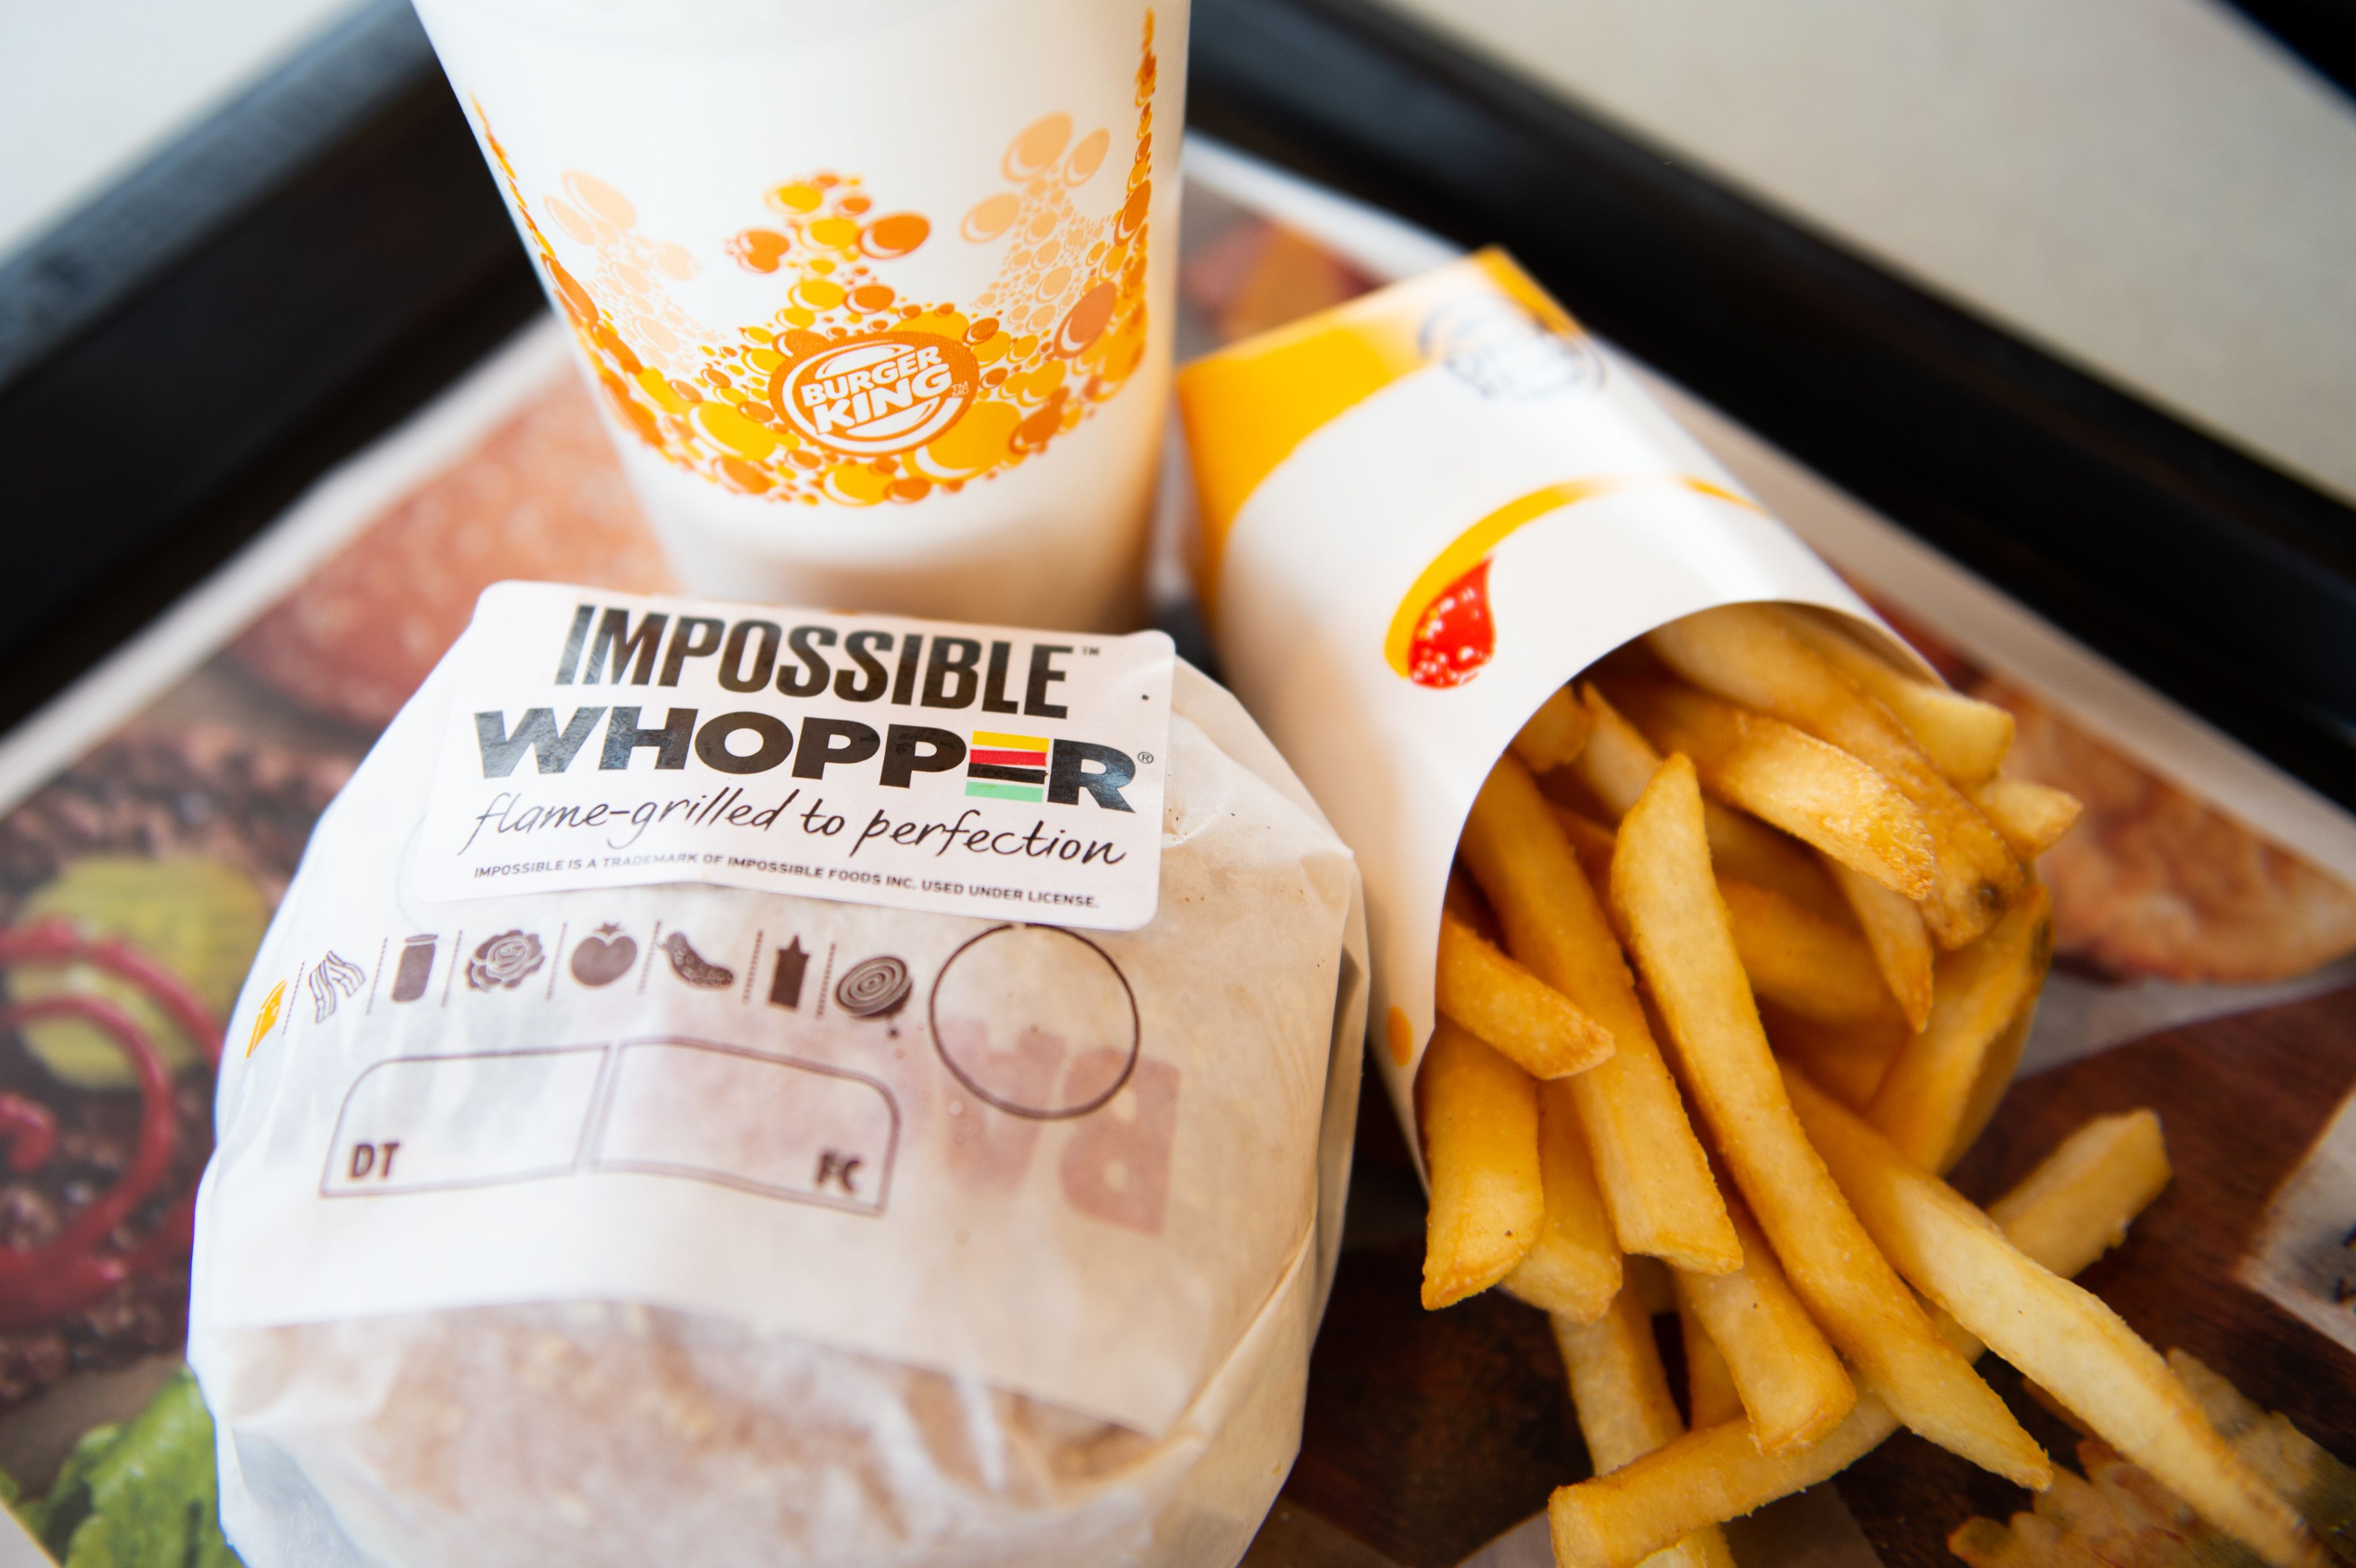 Burger King plans to roll out Impossible Whopper across the United States